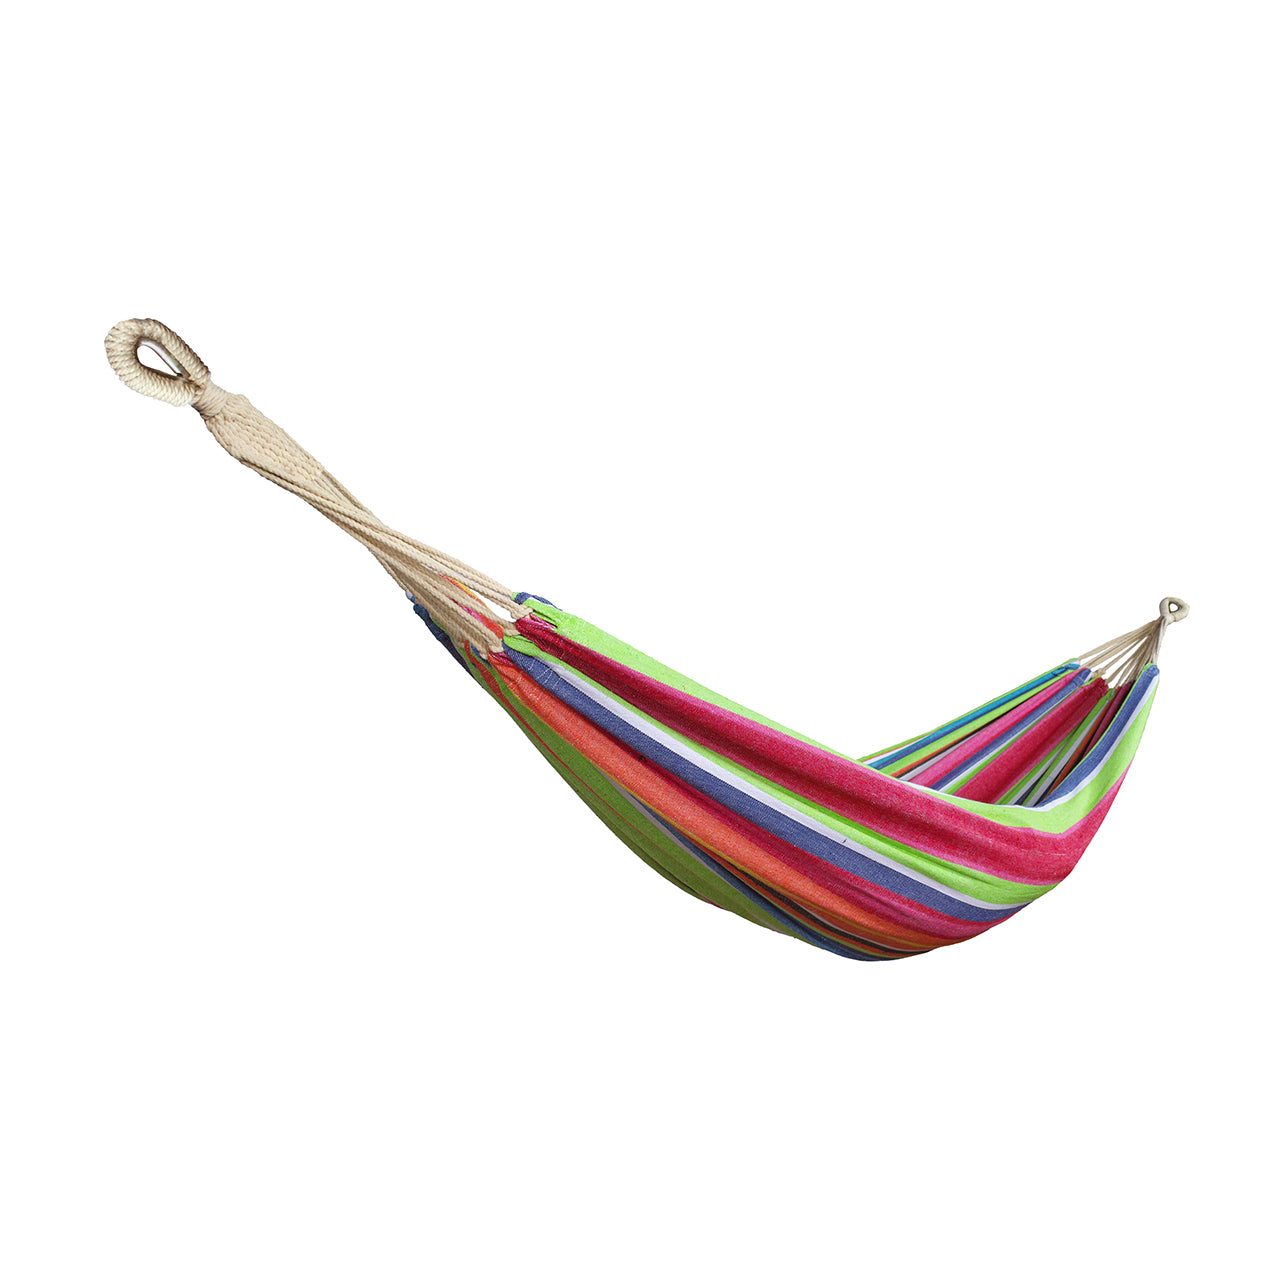 Bliss Hammocks 40-inch Wide Hammock in a Bag with Hand-woven Rope loops in the tropical fruit stripe variation.